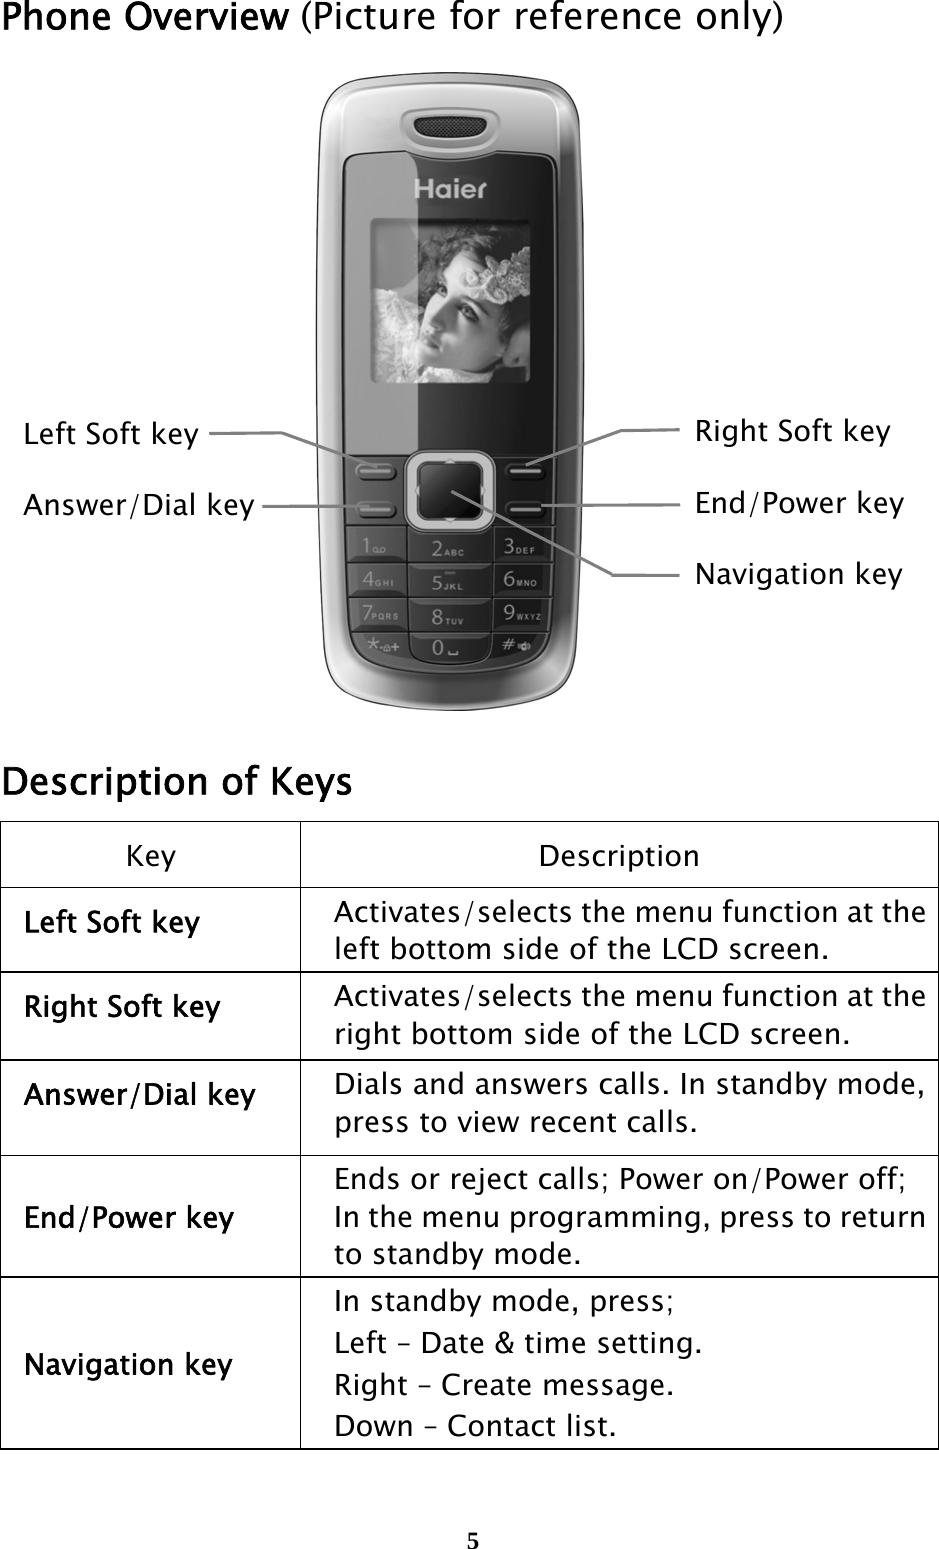  5Phone Overview (Picture for reference only)         Description of Keys Key Description Left Soft key  Activates/selects the menu function at the left bottom side of the LCD screen. Right Soft key Activates/selects the menu function at the right bottom side of the LCD screen. Answer/Dial key Dials and answers calls. In standby mode, press to view recent calls. End/Power key Ends or reject calls; Power on/Power off; In the menu programming, press to return to standby mode. Navigation key In standby mode, press; Left – Date &amp; time setting. Right – Create message. Down – Contact list. Left Soft key Answer/Dial key Right Soft keyEnd/Power keyNavigation key